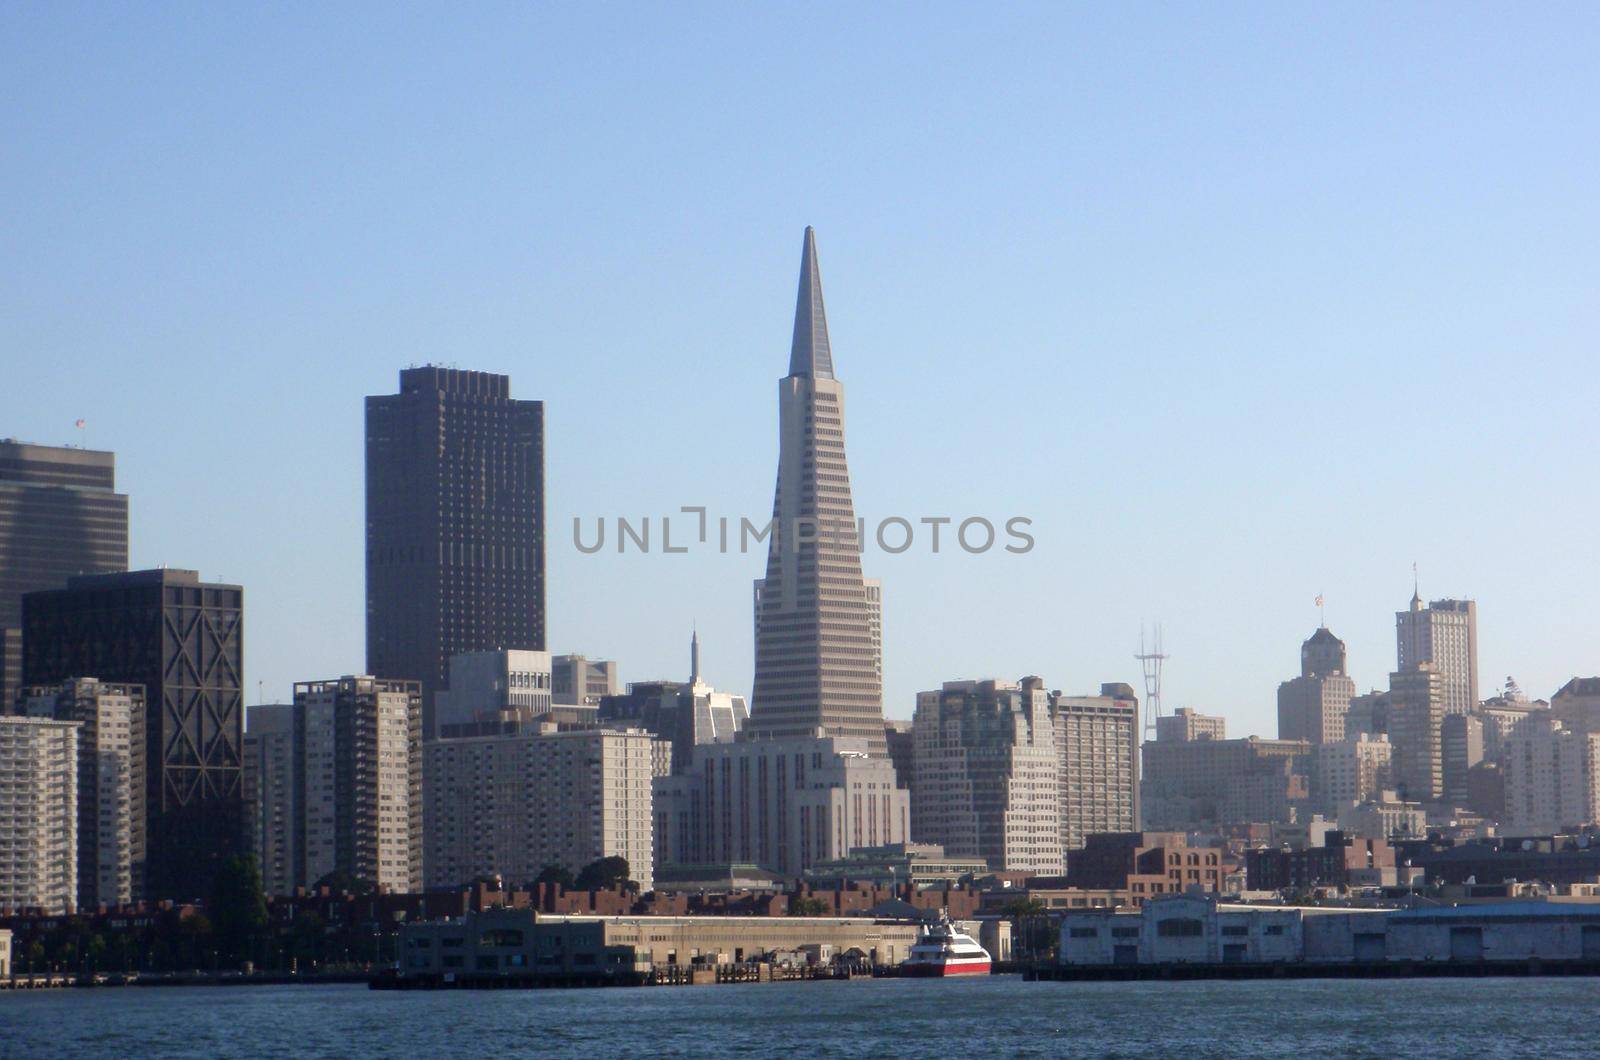 San Francisco coast from the water featuring the cities pyramid